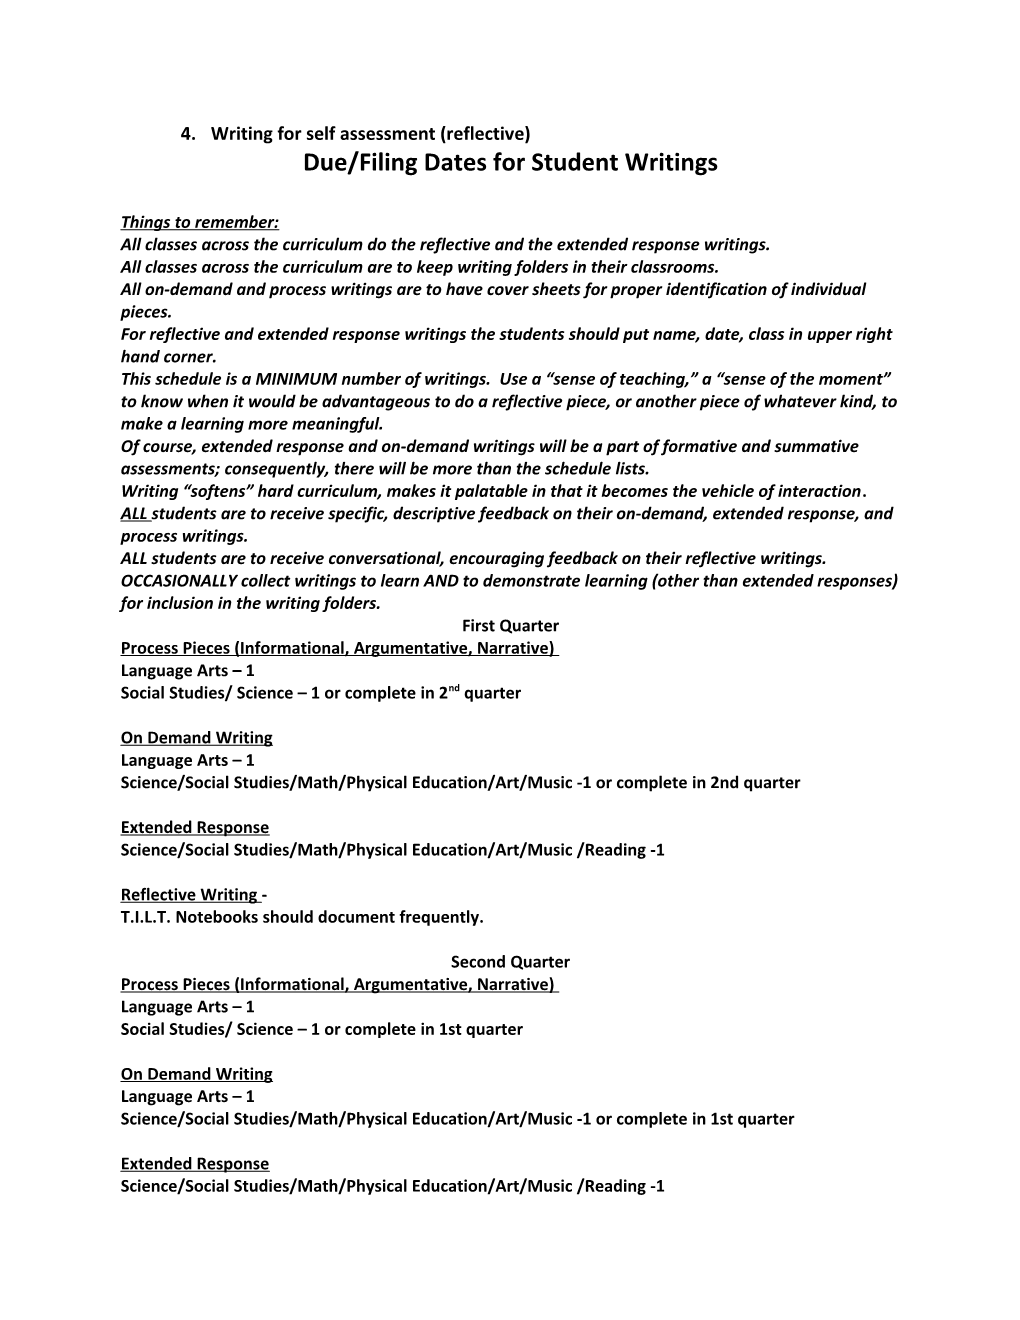 LCMS Across the Curriculum Writing Schedule